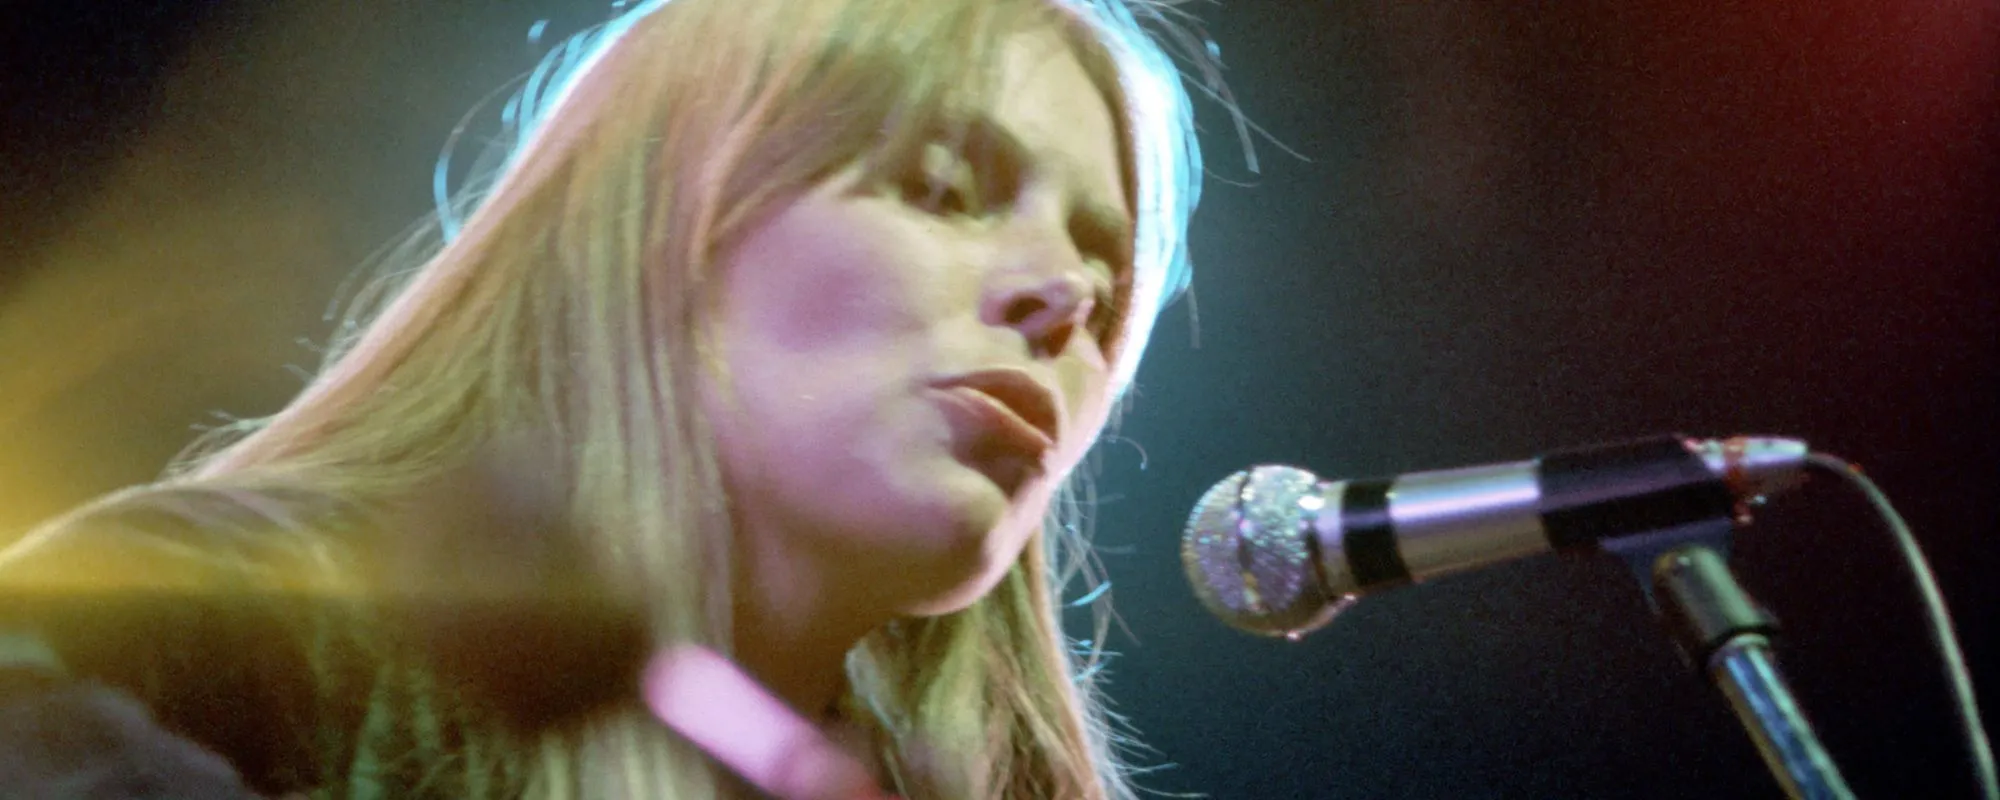 Joni Mitchell’s “Little Green” and the Heartbreaking Decision That Inspired It